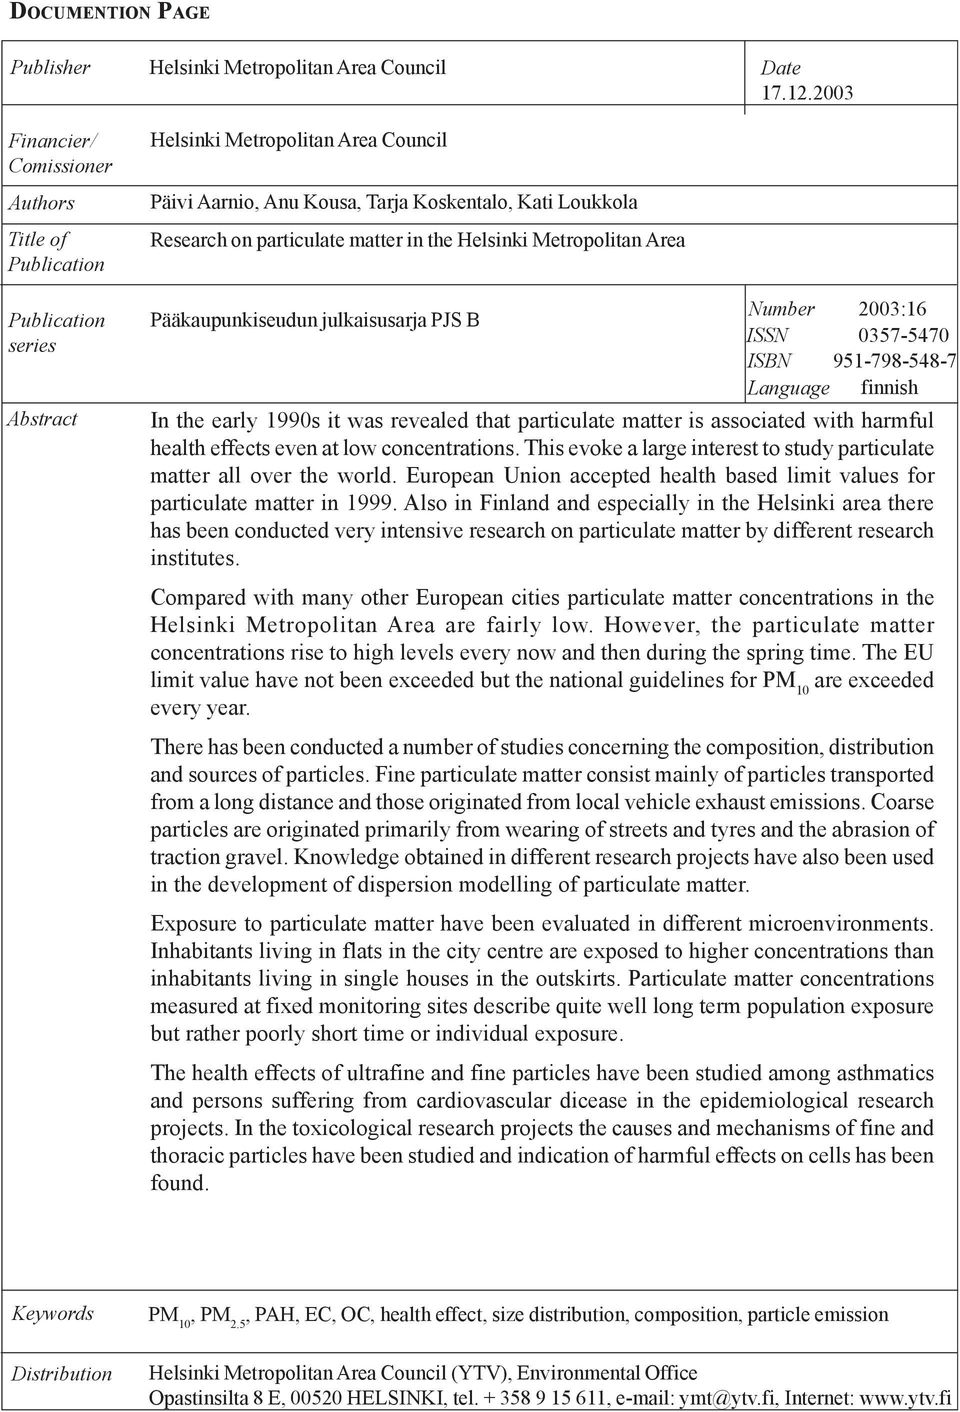 2003 Publication series Abstract Pääkaupunkiseudun julkaisusarja PJS B Number 2003:16 ISSN 0357-5470 ISBN 951-798-548-7 Language finnish In the early 1990s it was revealed that particulate matter is